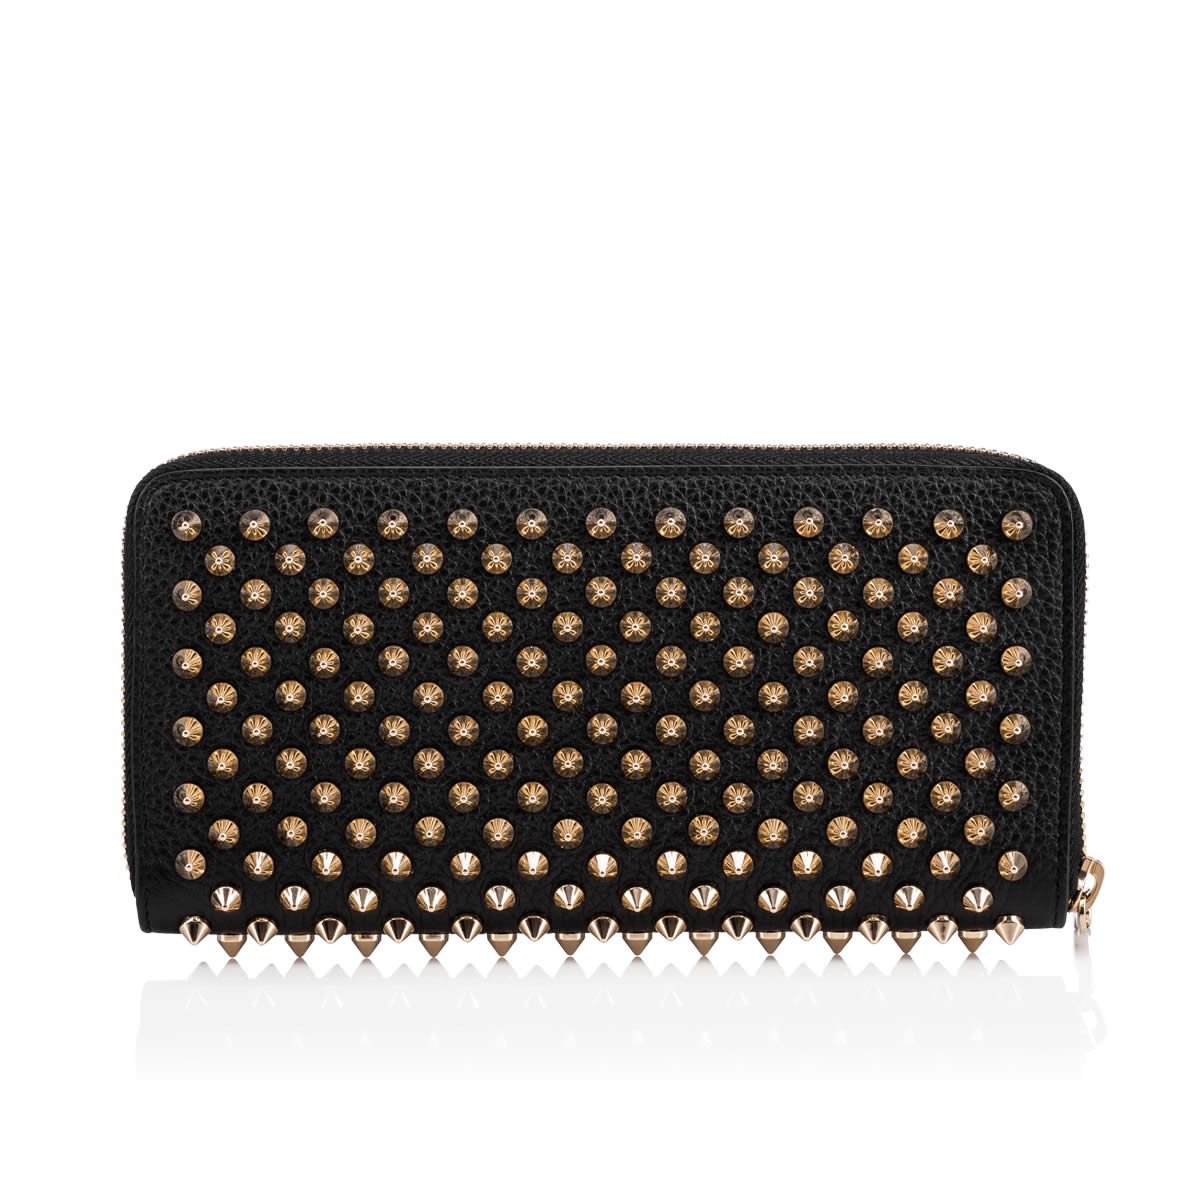 Small Leather Goods - Panettone Wallet Woman - Christian Louboutin